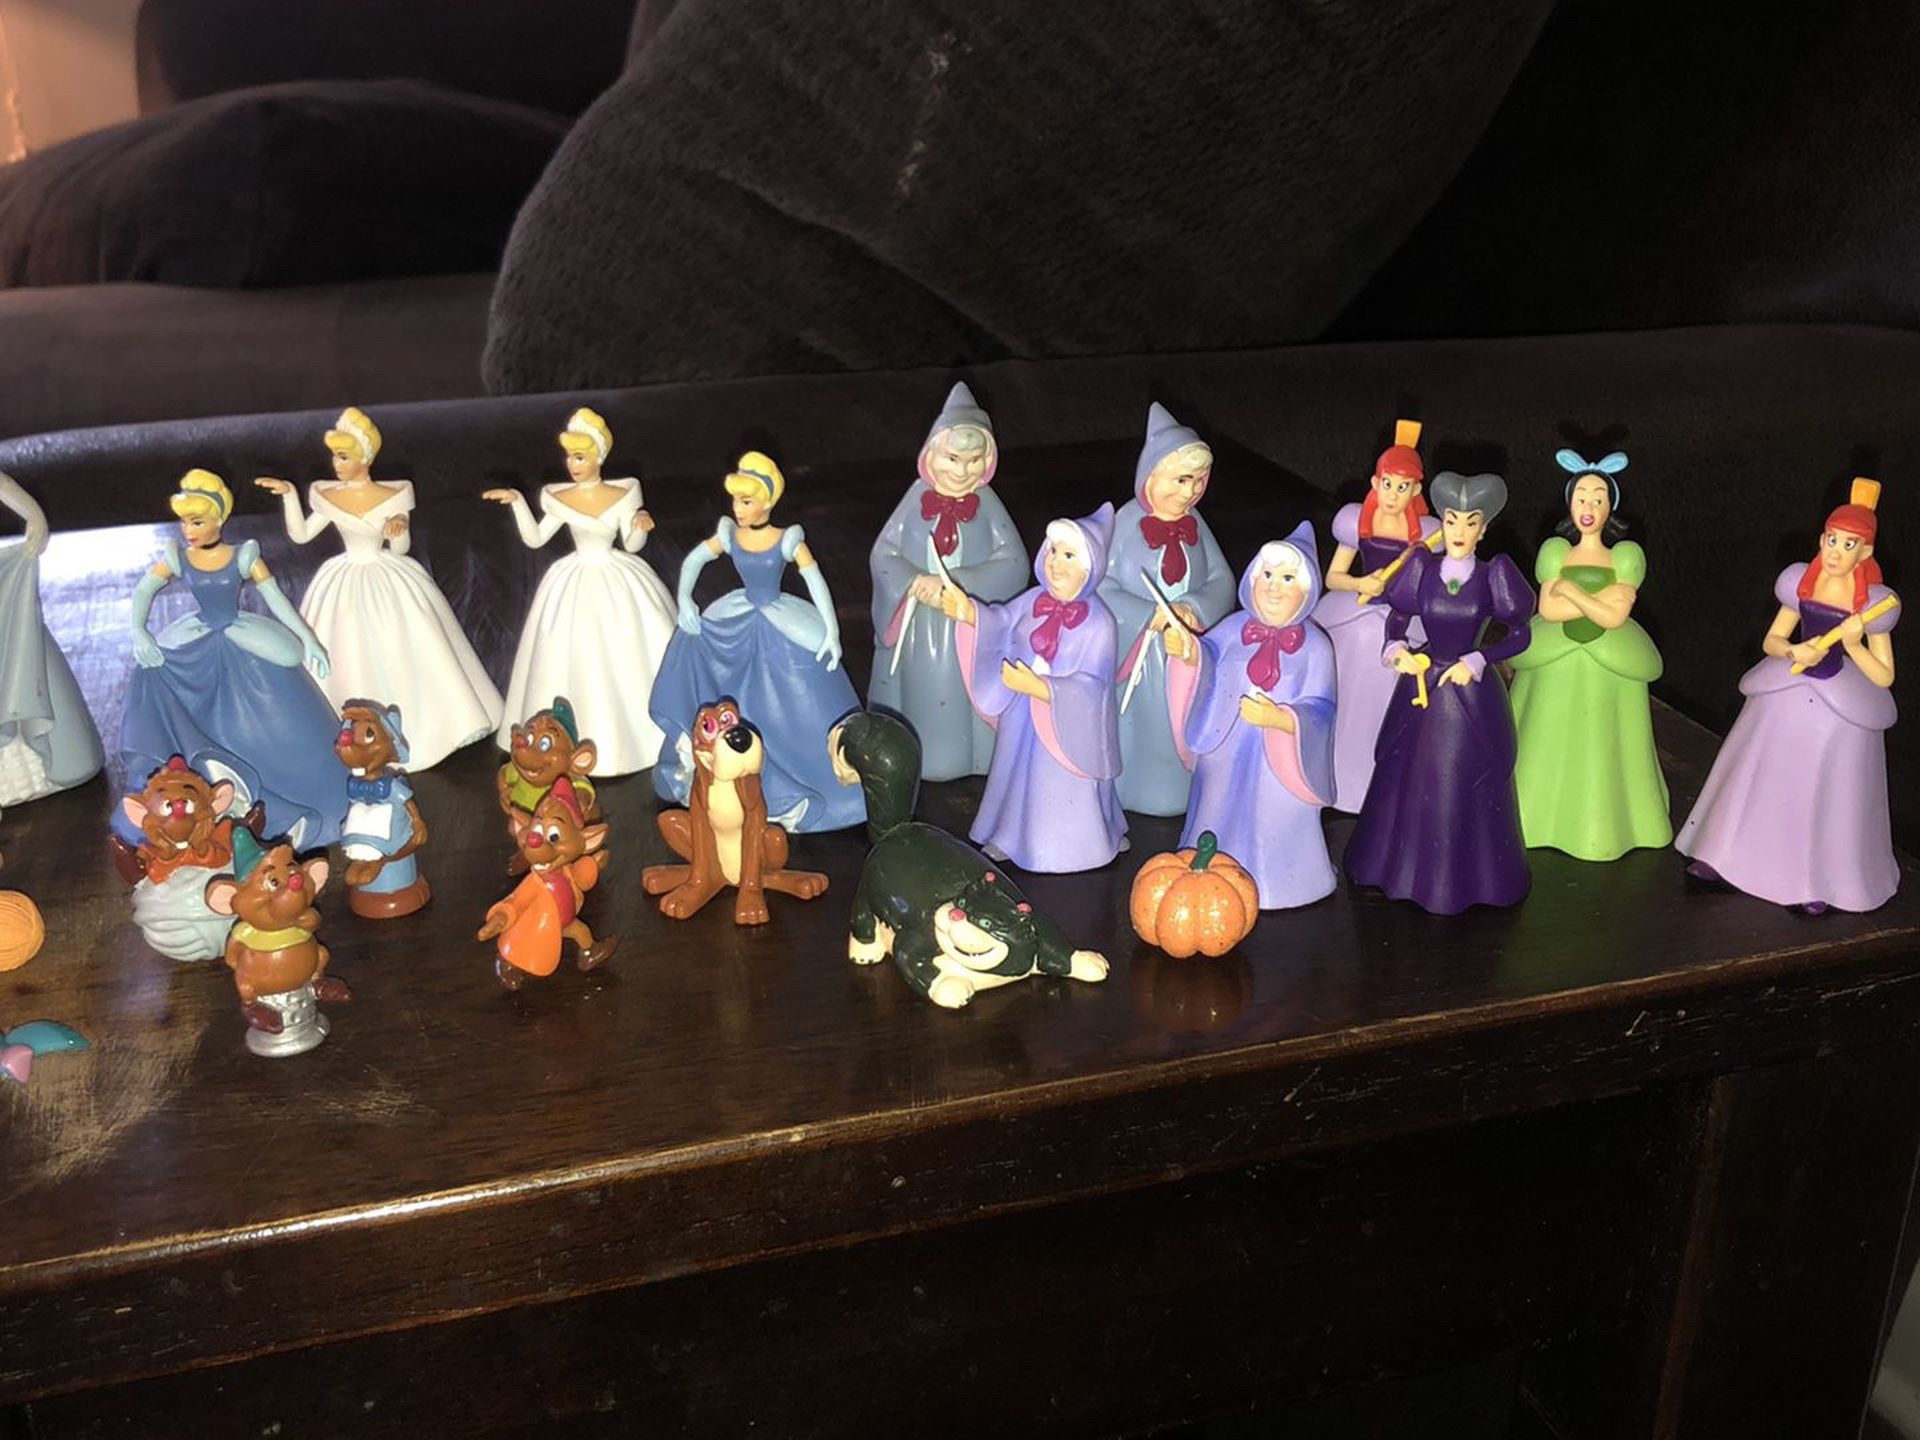 Collection of Disney movie figures